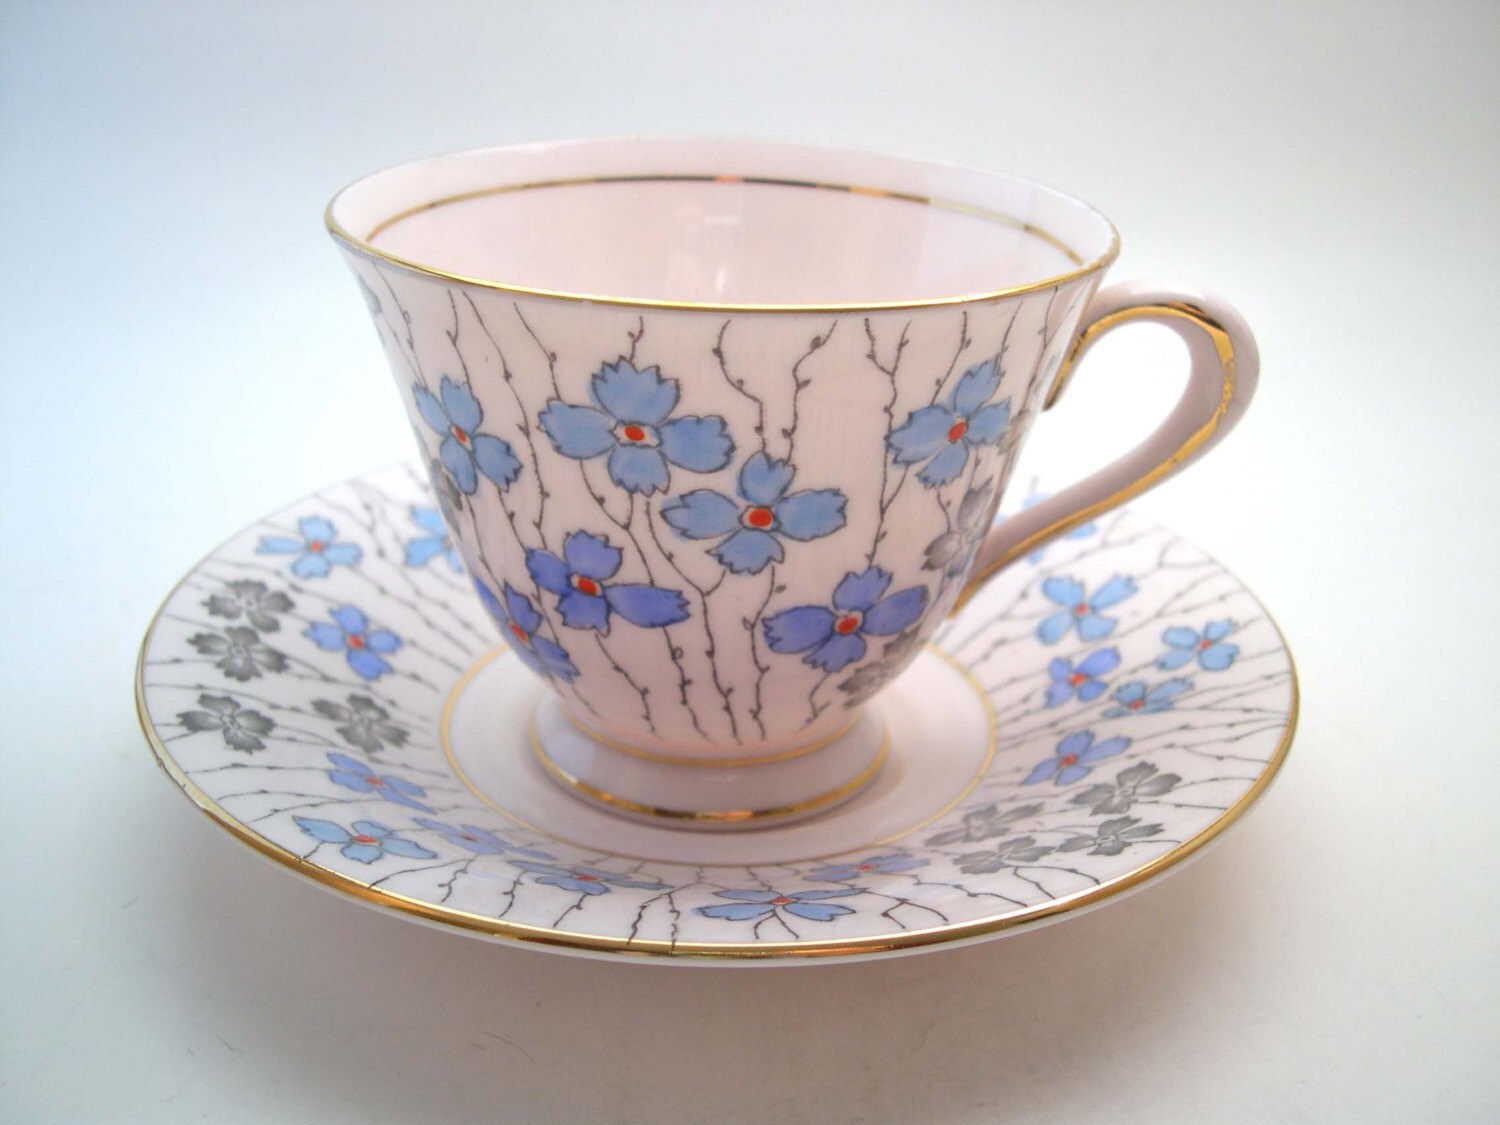 Pink Handpainted Tuscan floral tea cup and saucer unique English tea set gift for her